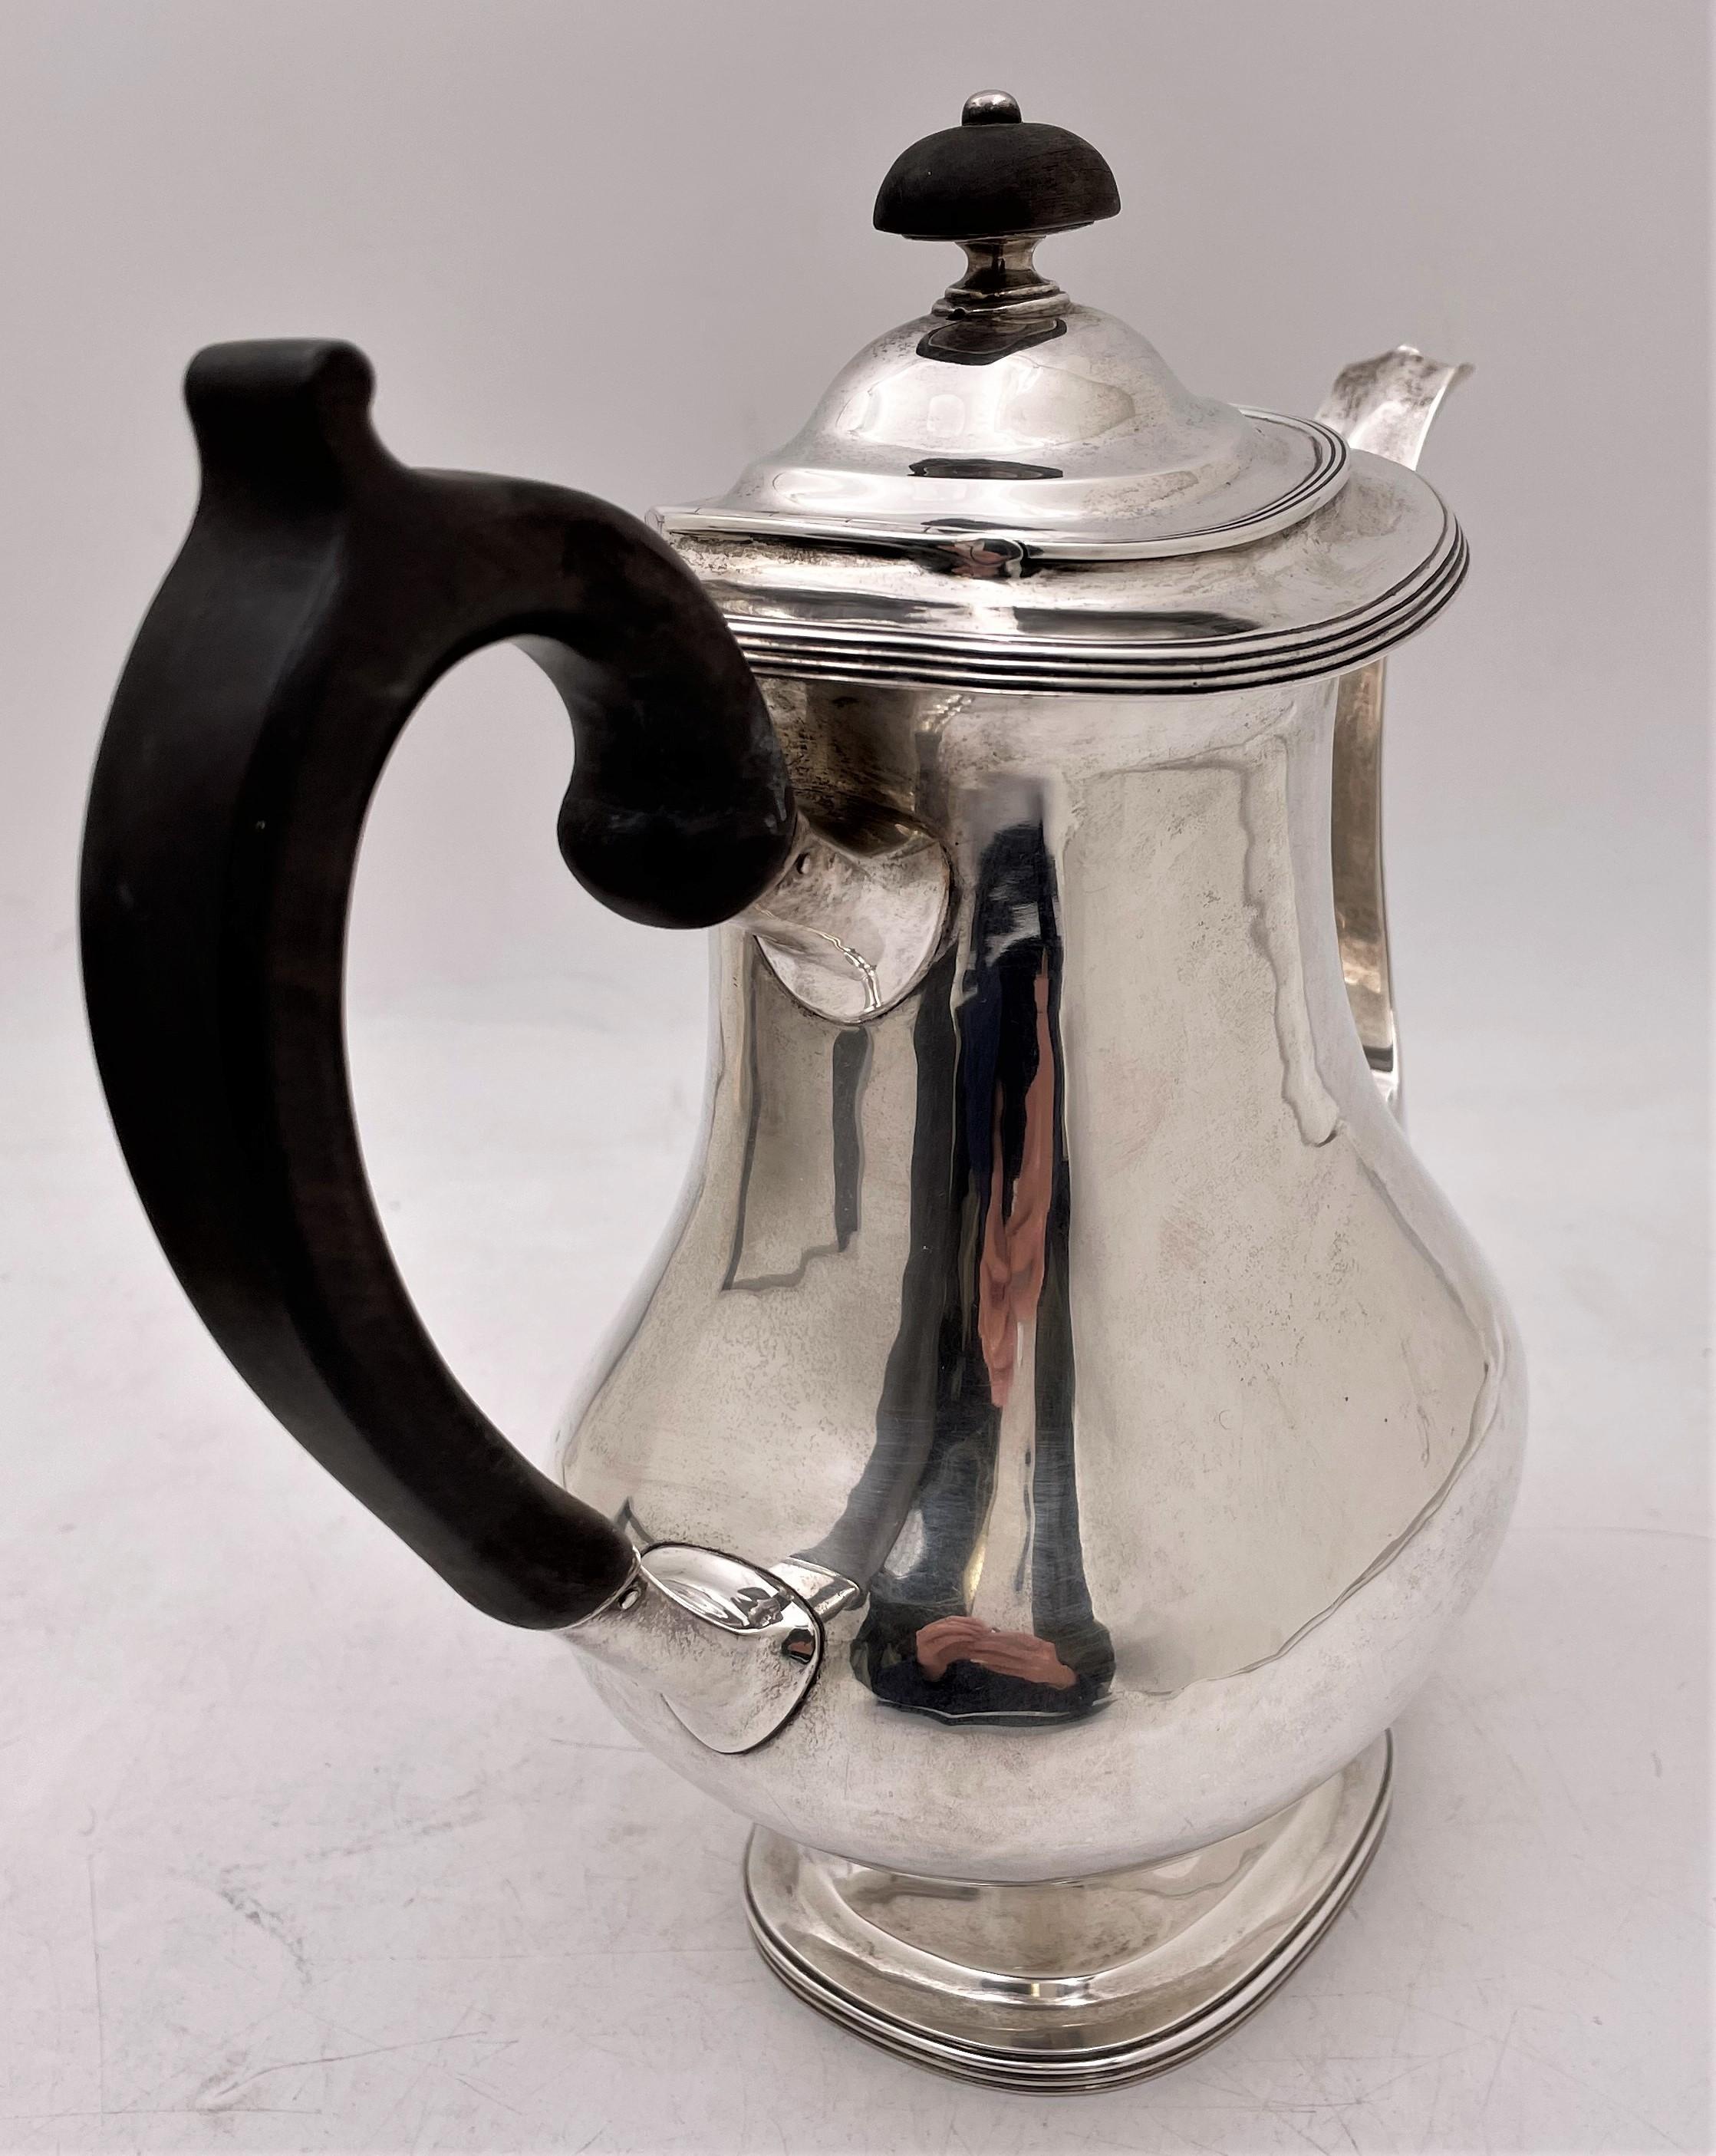 Arthur Stone, hand hammered sterling silver coffee pot in Arts & Crafts style with a dark wood handle and finial. This extremely elegant pot exhibits the attention to geometric, curvilinear design typical of the Arts & Crafts movement. It measures 8